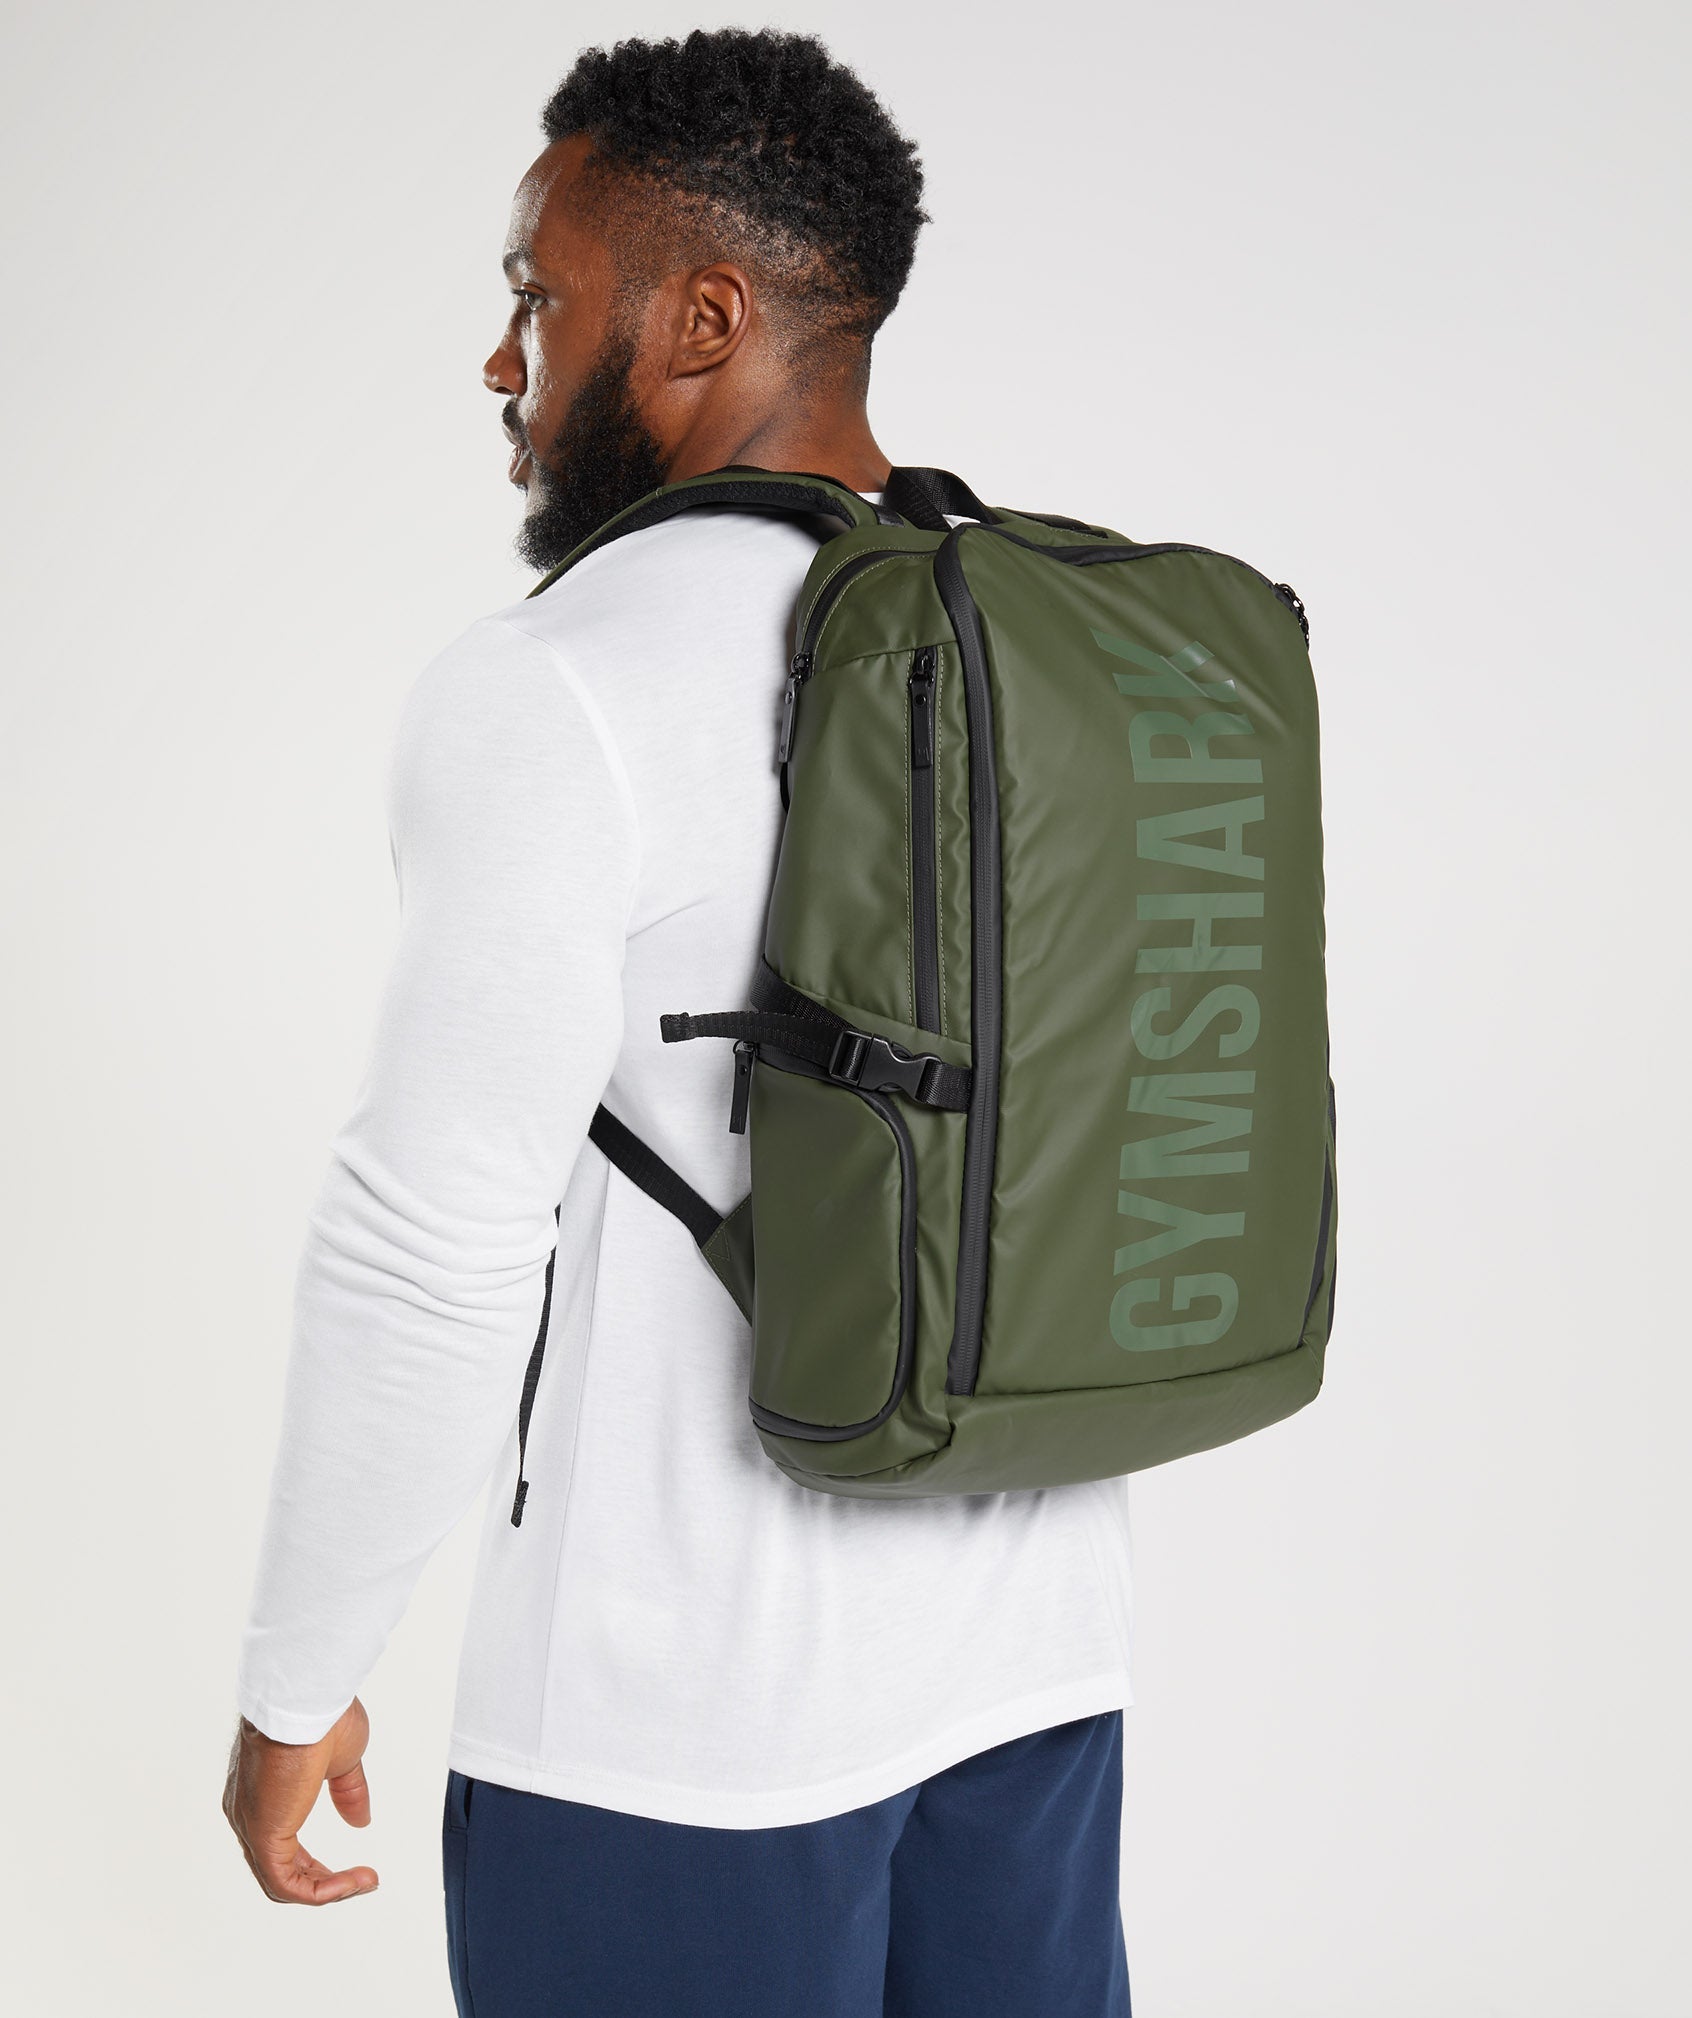 X-Series 0.3 Backpack in Core Olive - view 1